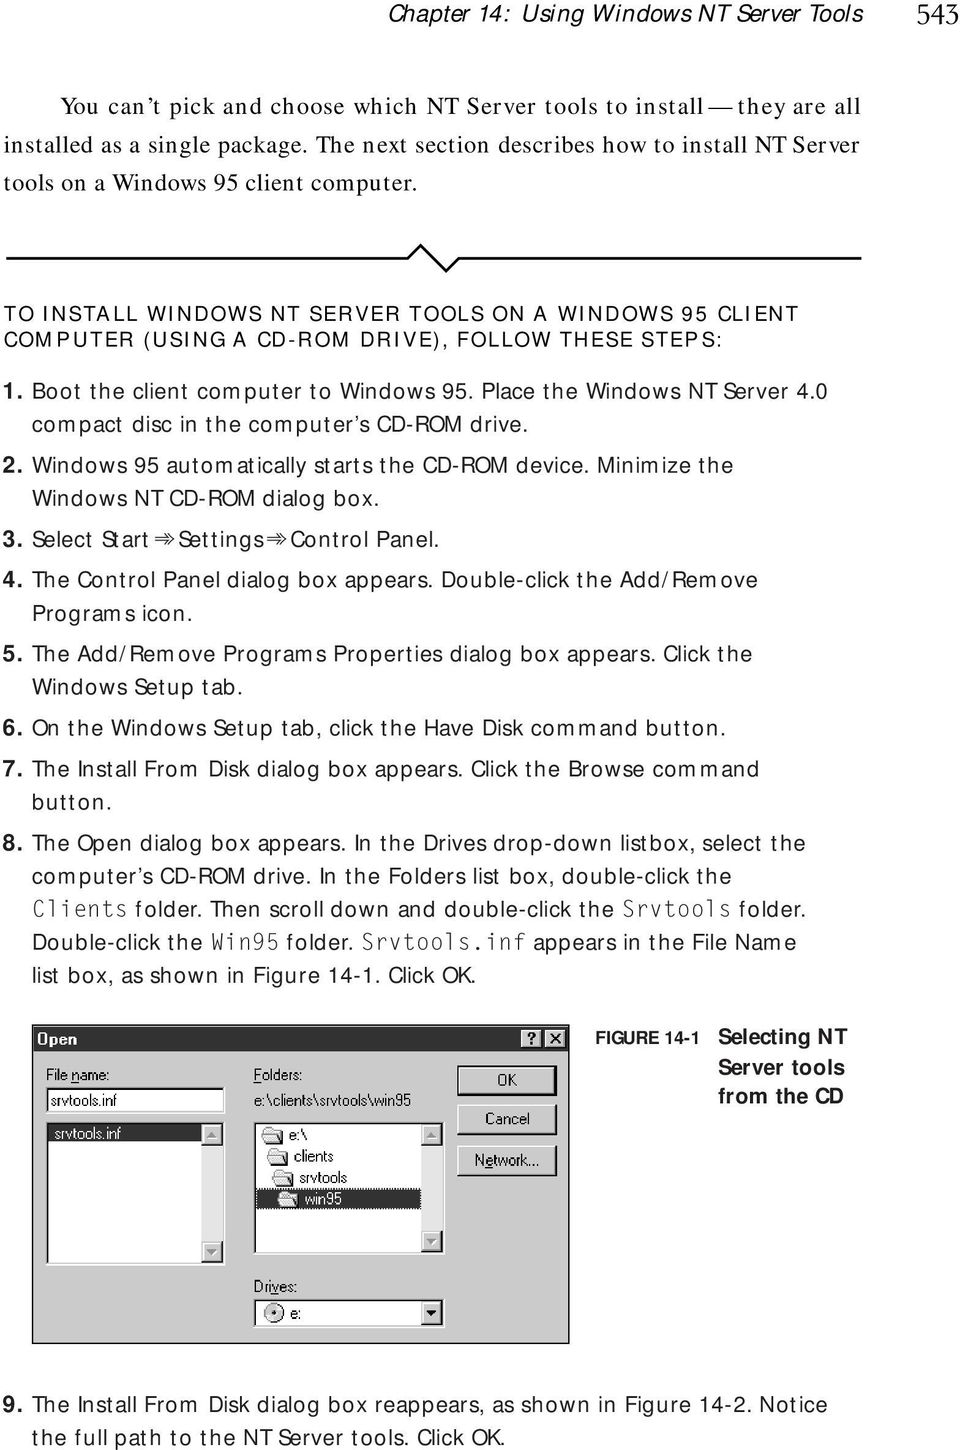 TO INSTALL WINDOWS NT SERVER TOOLS ON A WINDOWS 95 CLIENT COMPUTER (USING A CD-ROM DRIVE), FOLLOW THESE STEPS: 1. Boot the client computer to Windows 95. Place the Windows NT Server 4.